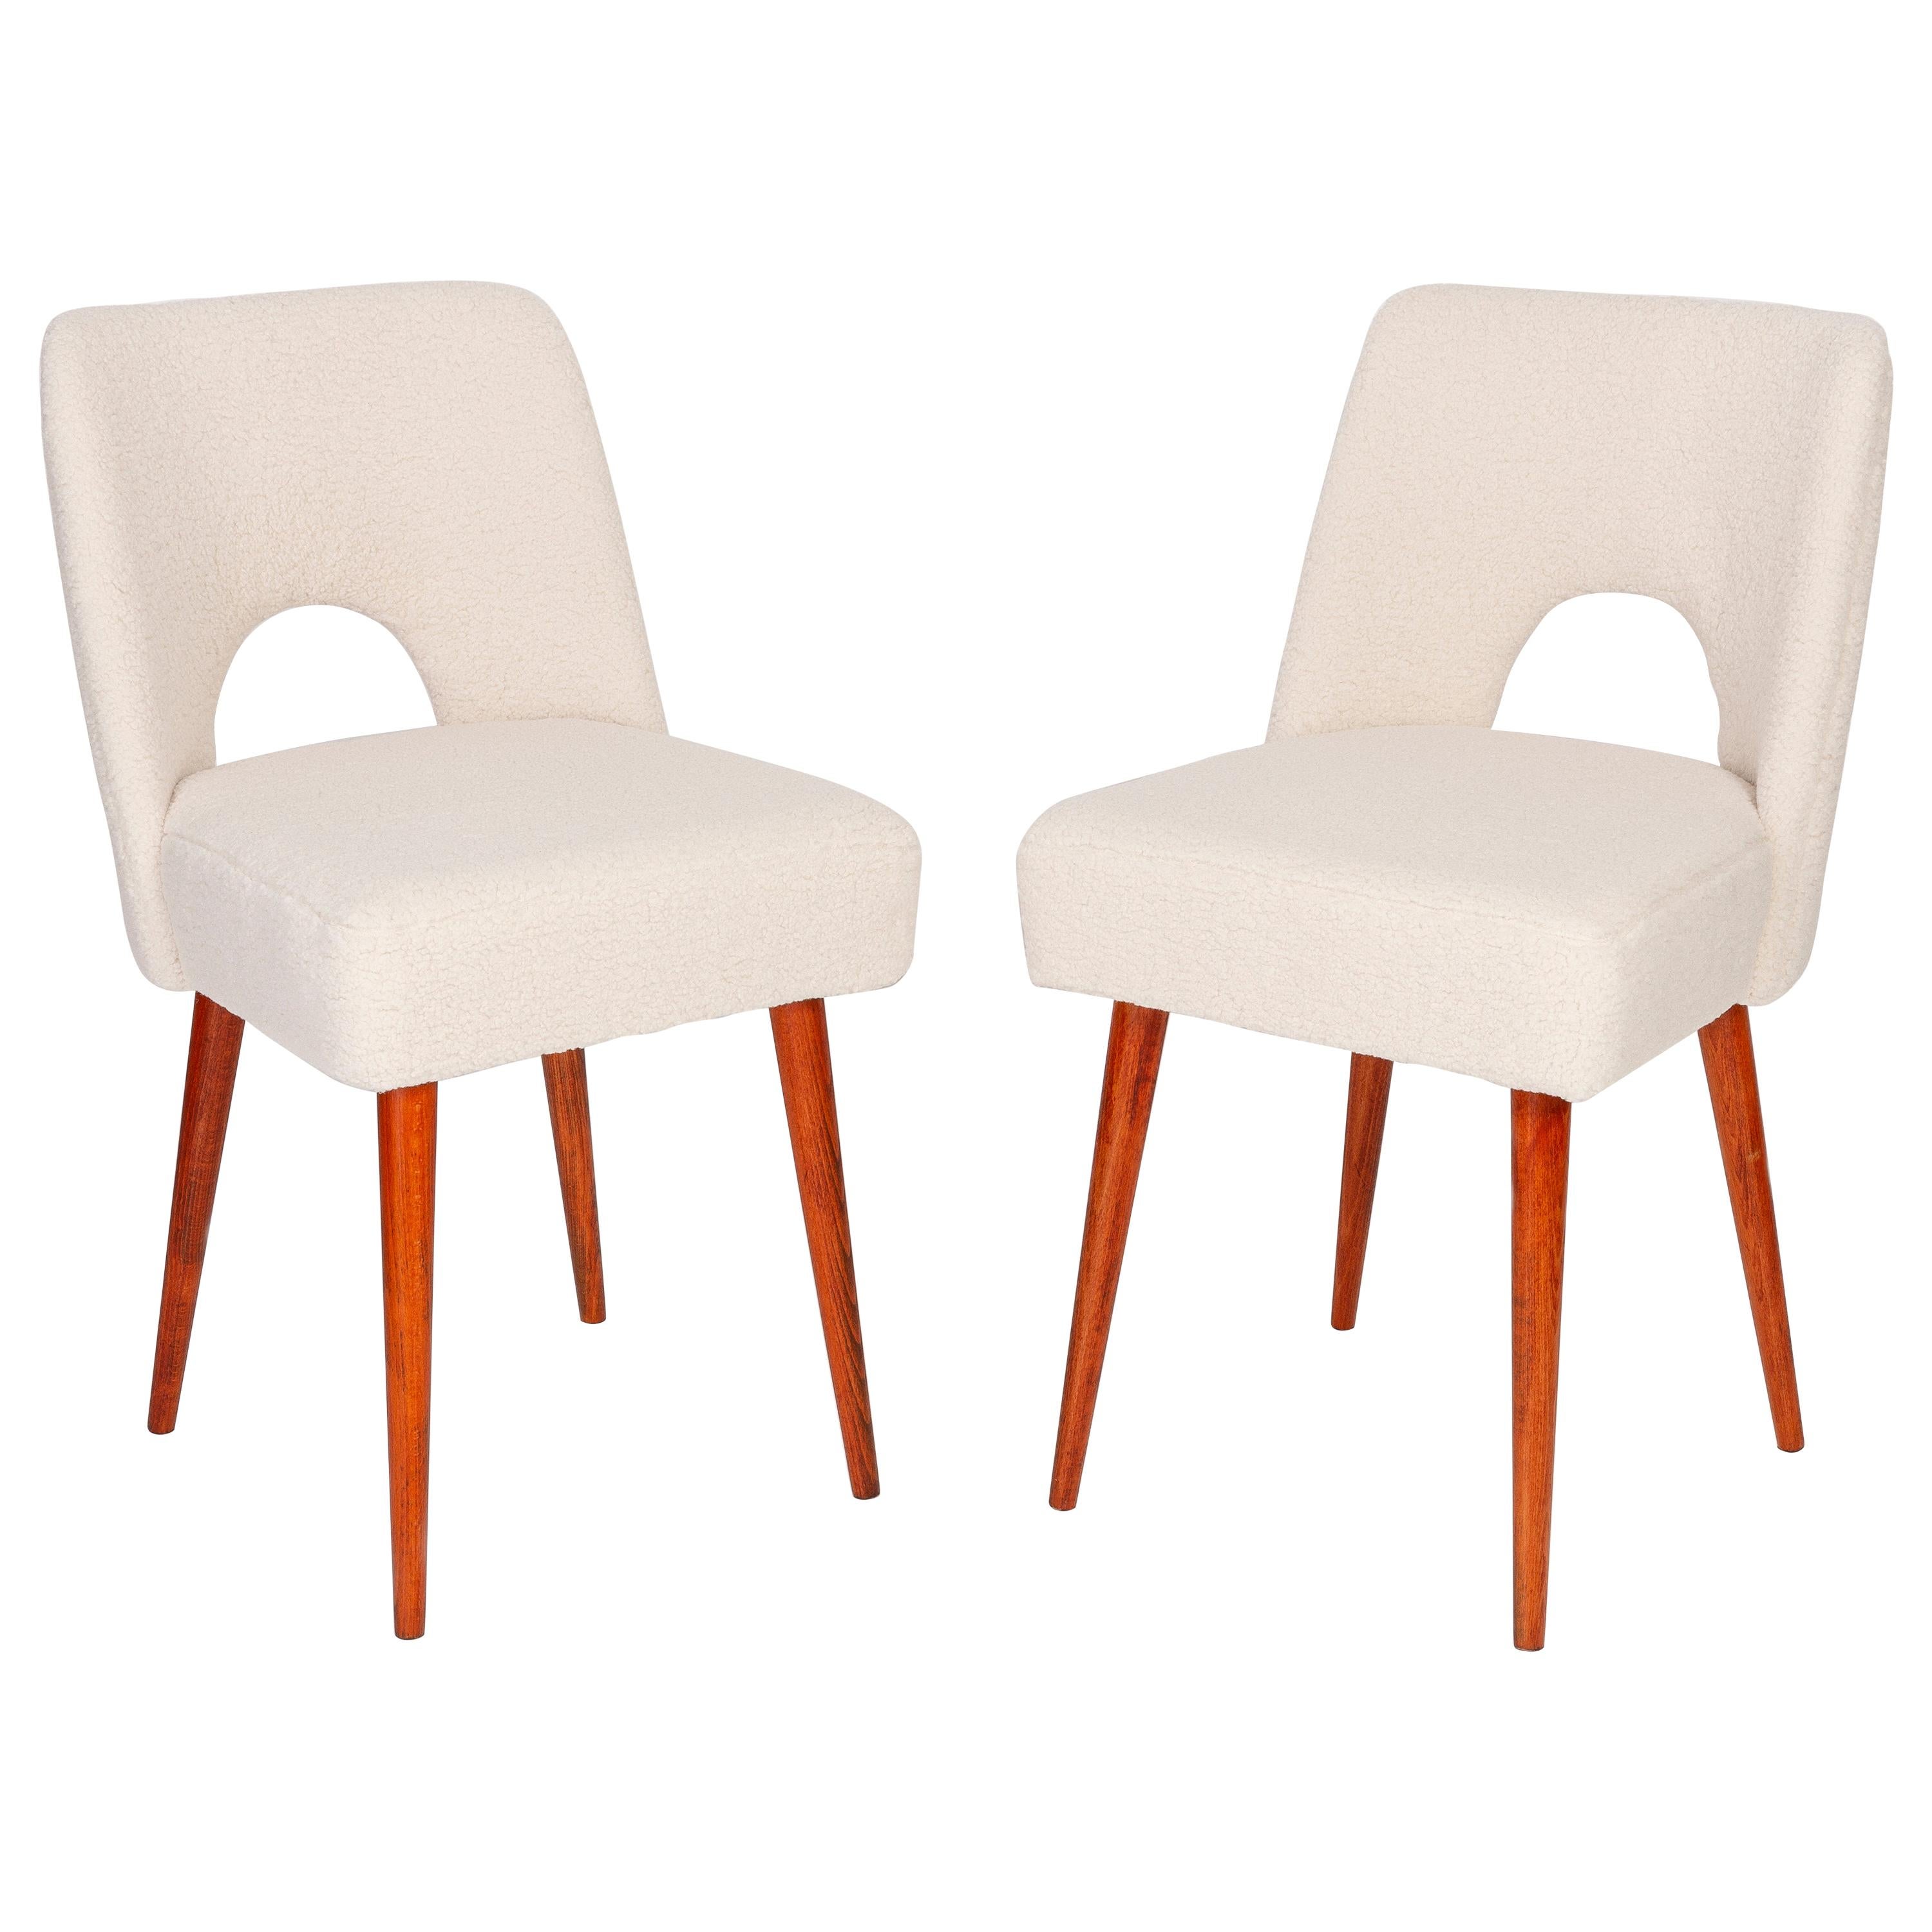 Set of Two Light Crème Boucle 'Shell' Chairs, 1960s For Sale